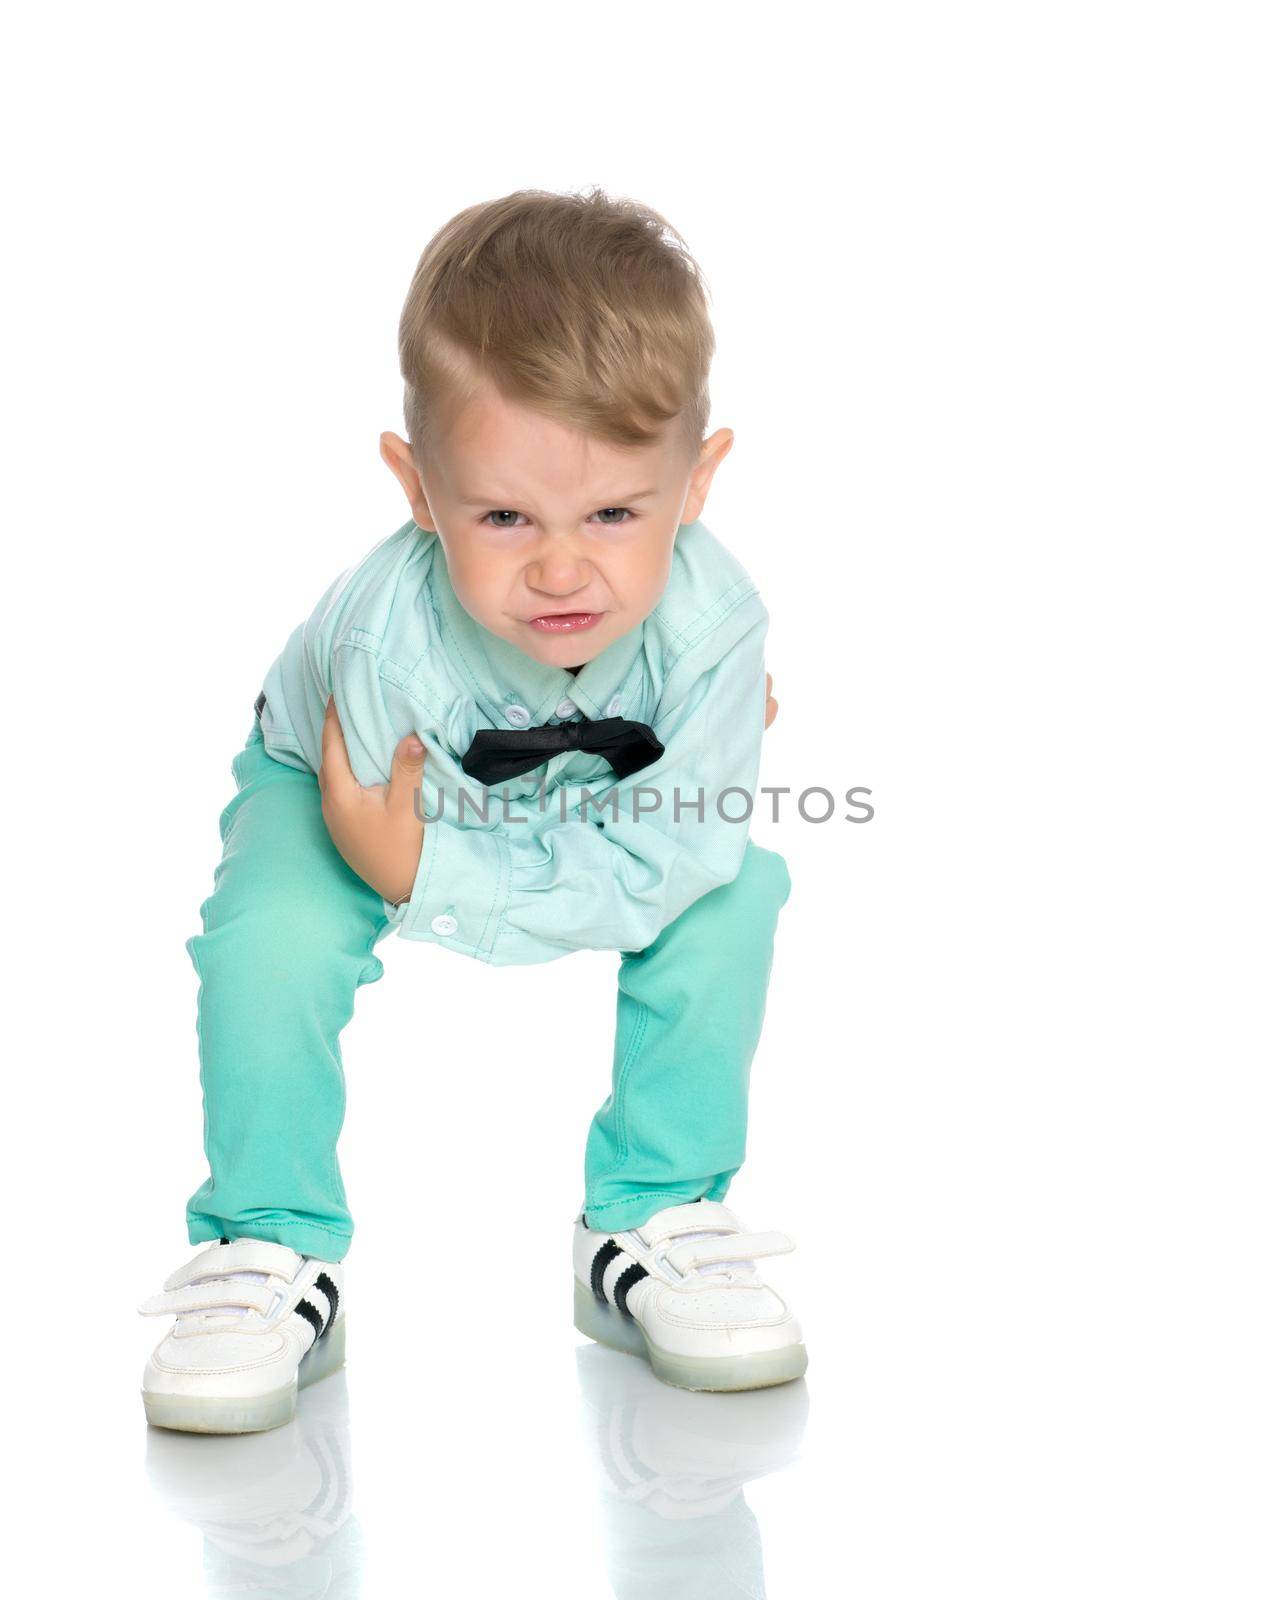 Little boy emotionally waving his hands in the studio on a white background. The concept of a happy childhood, family and people. Isolated.